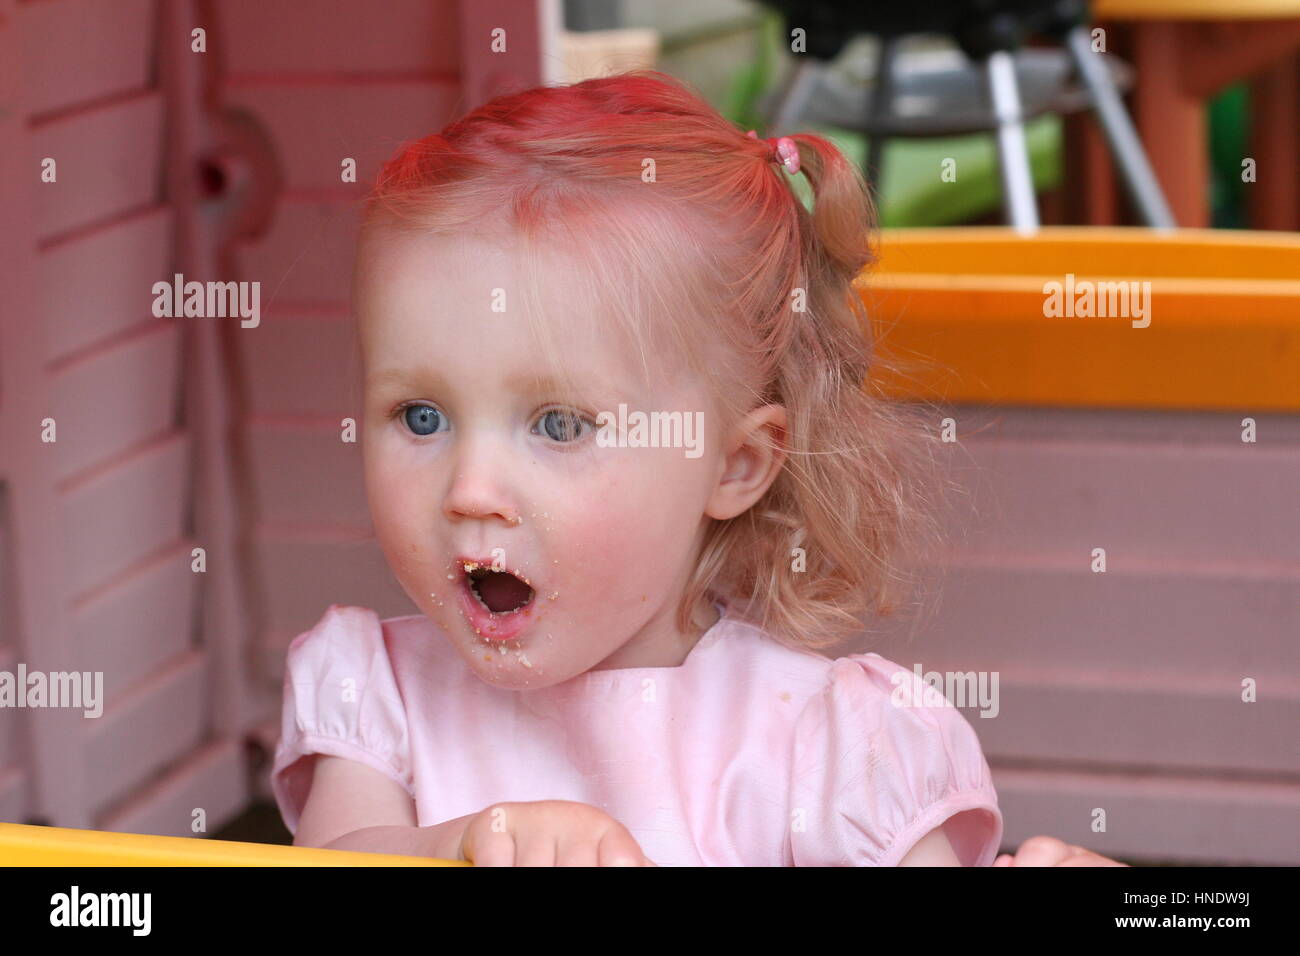 6. Toddler with Curly Blonde Hair and Blue Eyes - wide 4